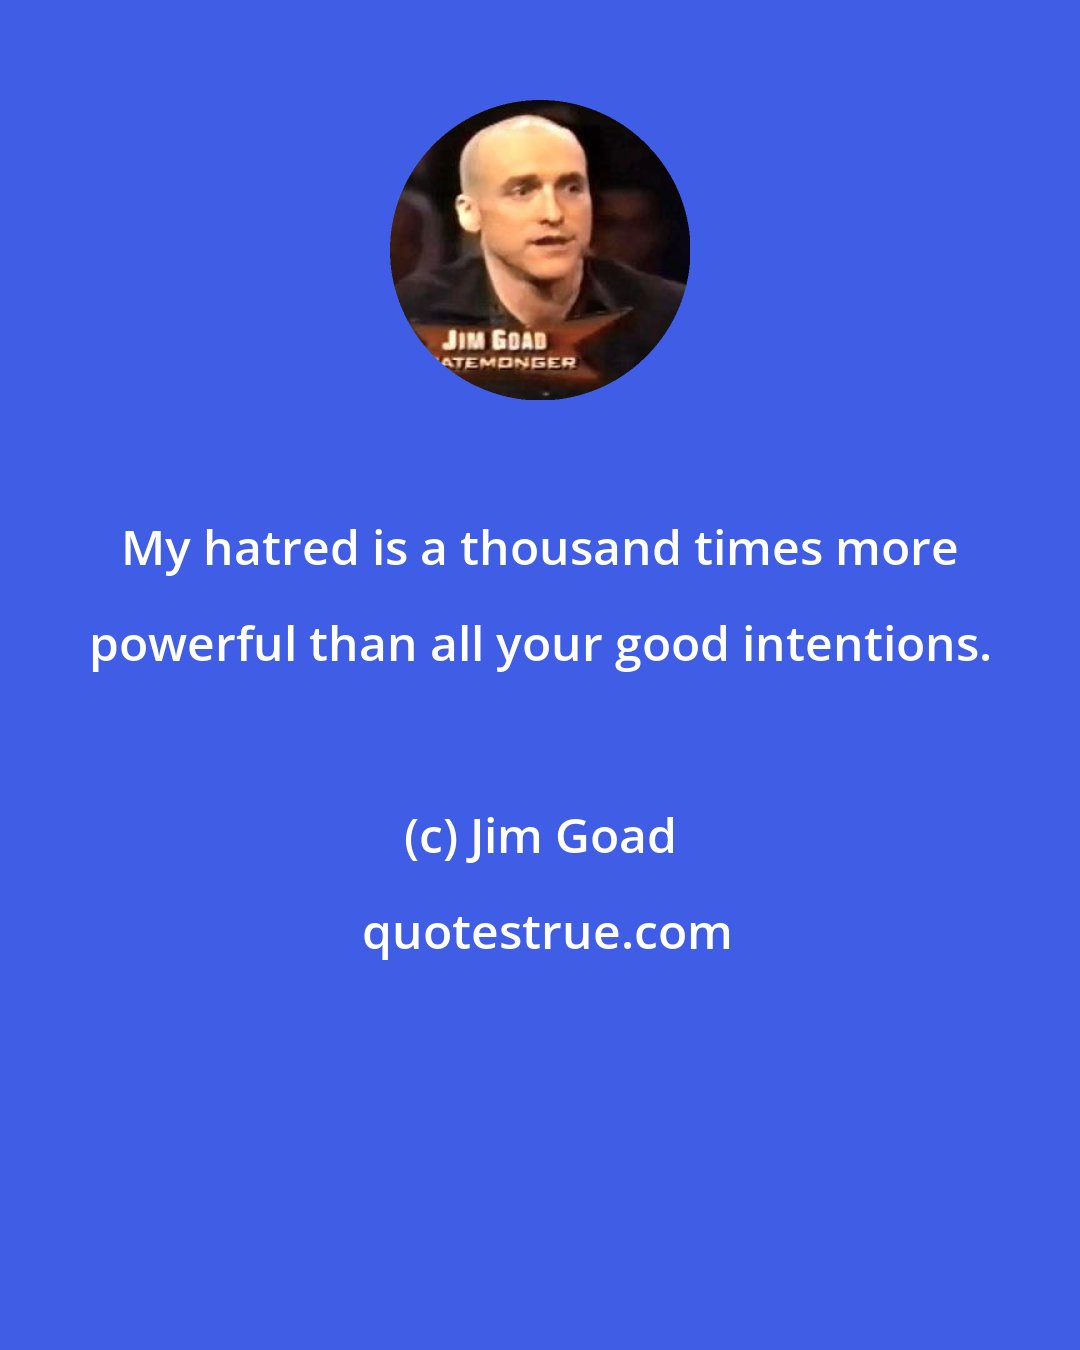 Jim Goad: My hatred is a thousand times more powerful than all your good intentions.